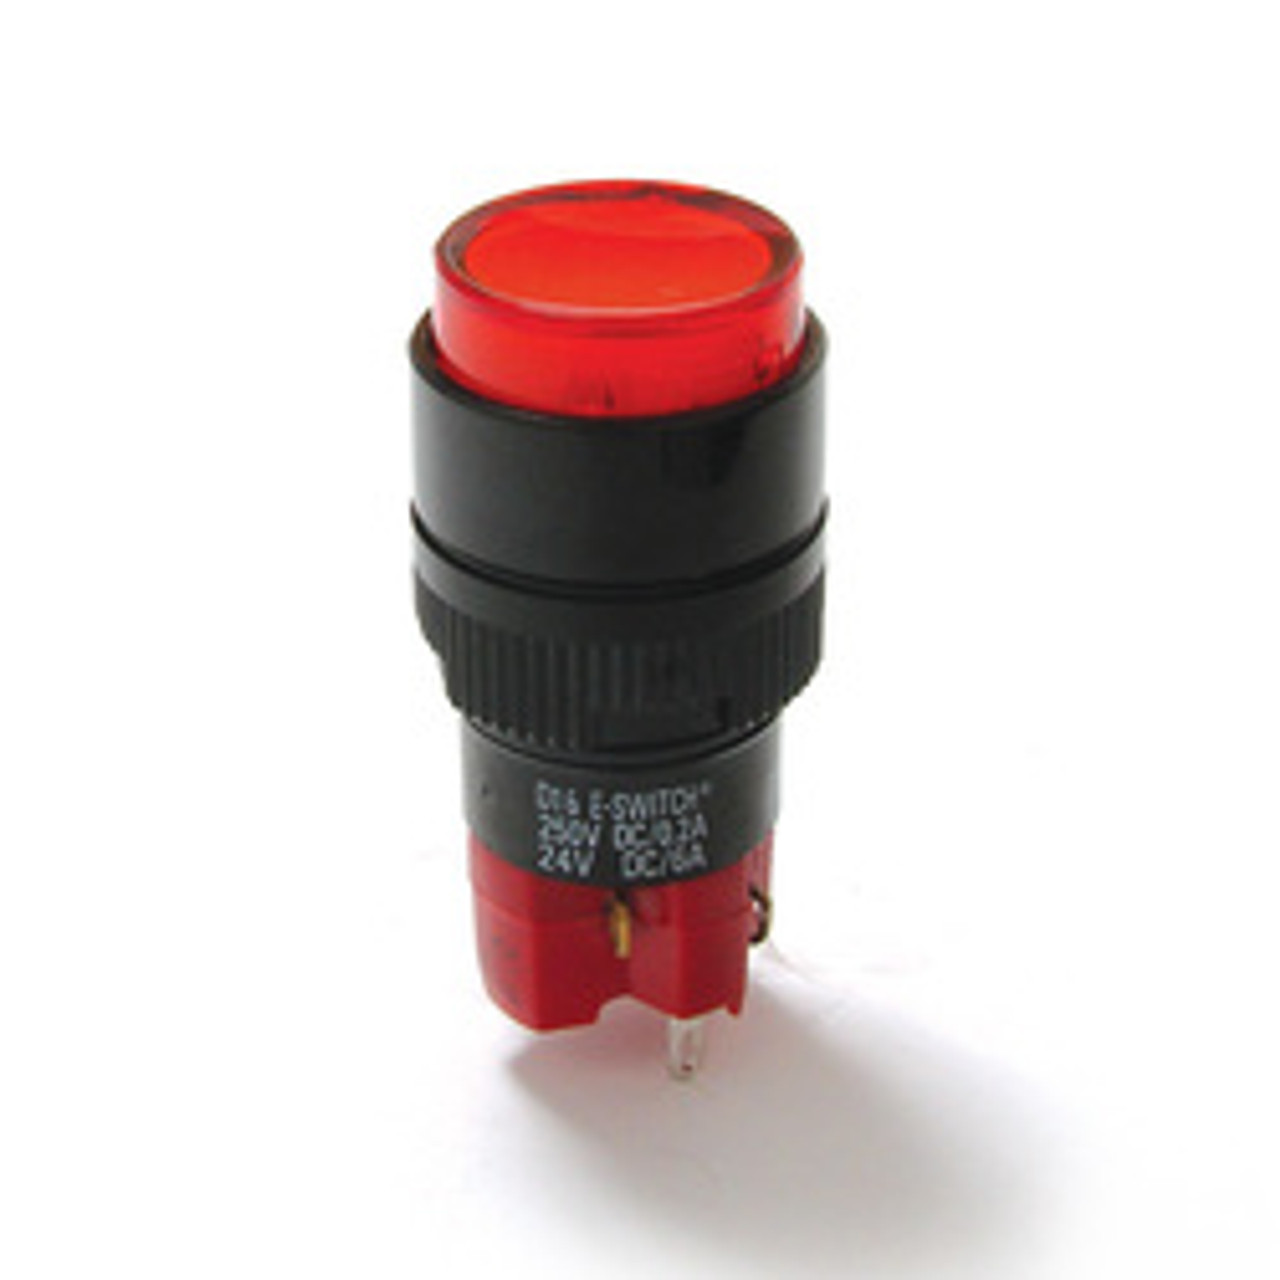 E-Switch D16EES24 Pushbutton Switches